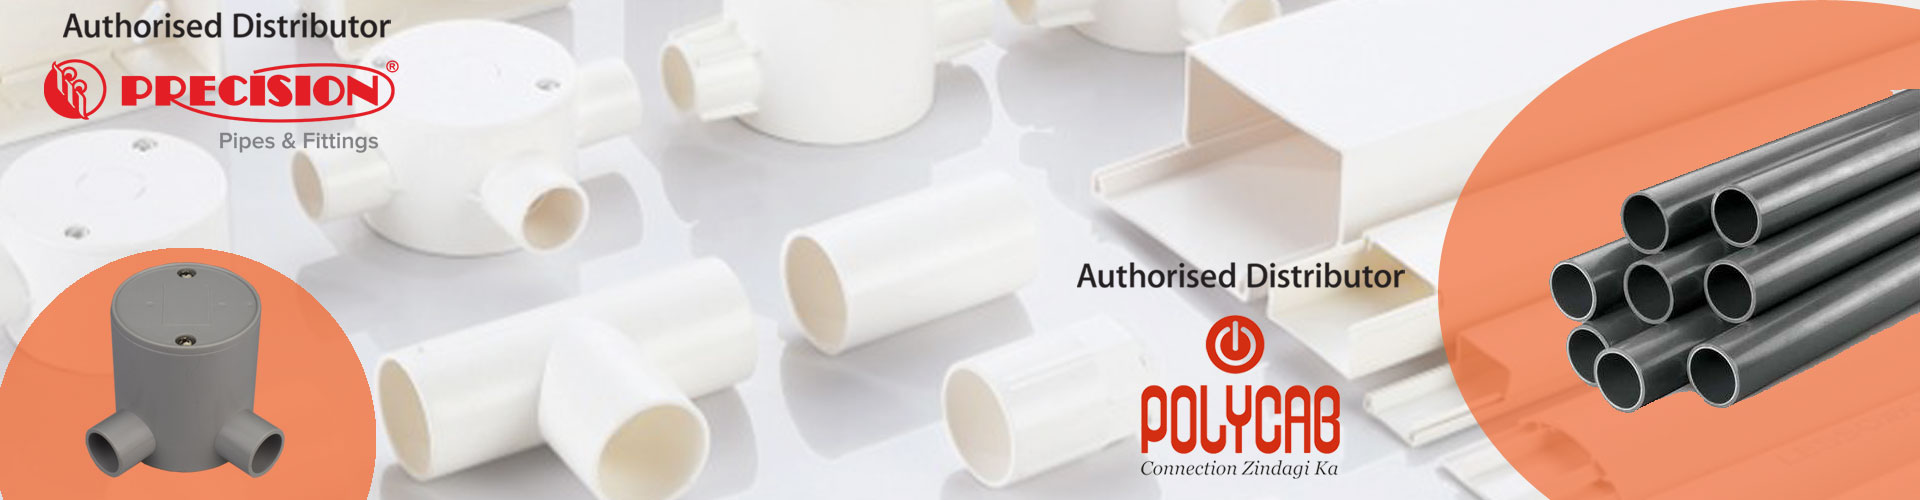 mohta pipe product banner image